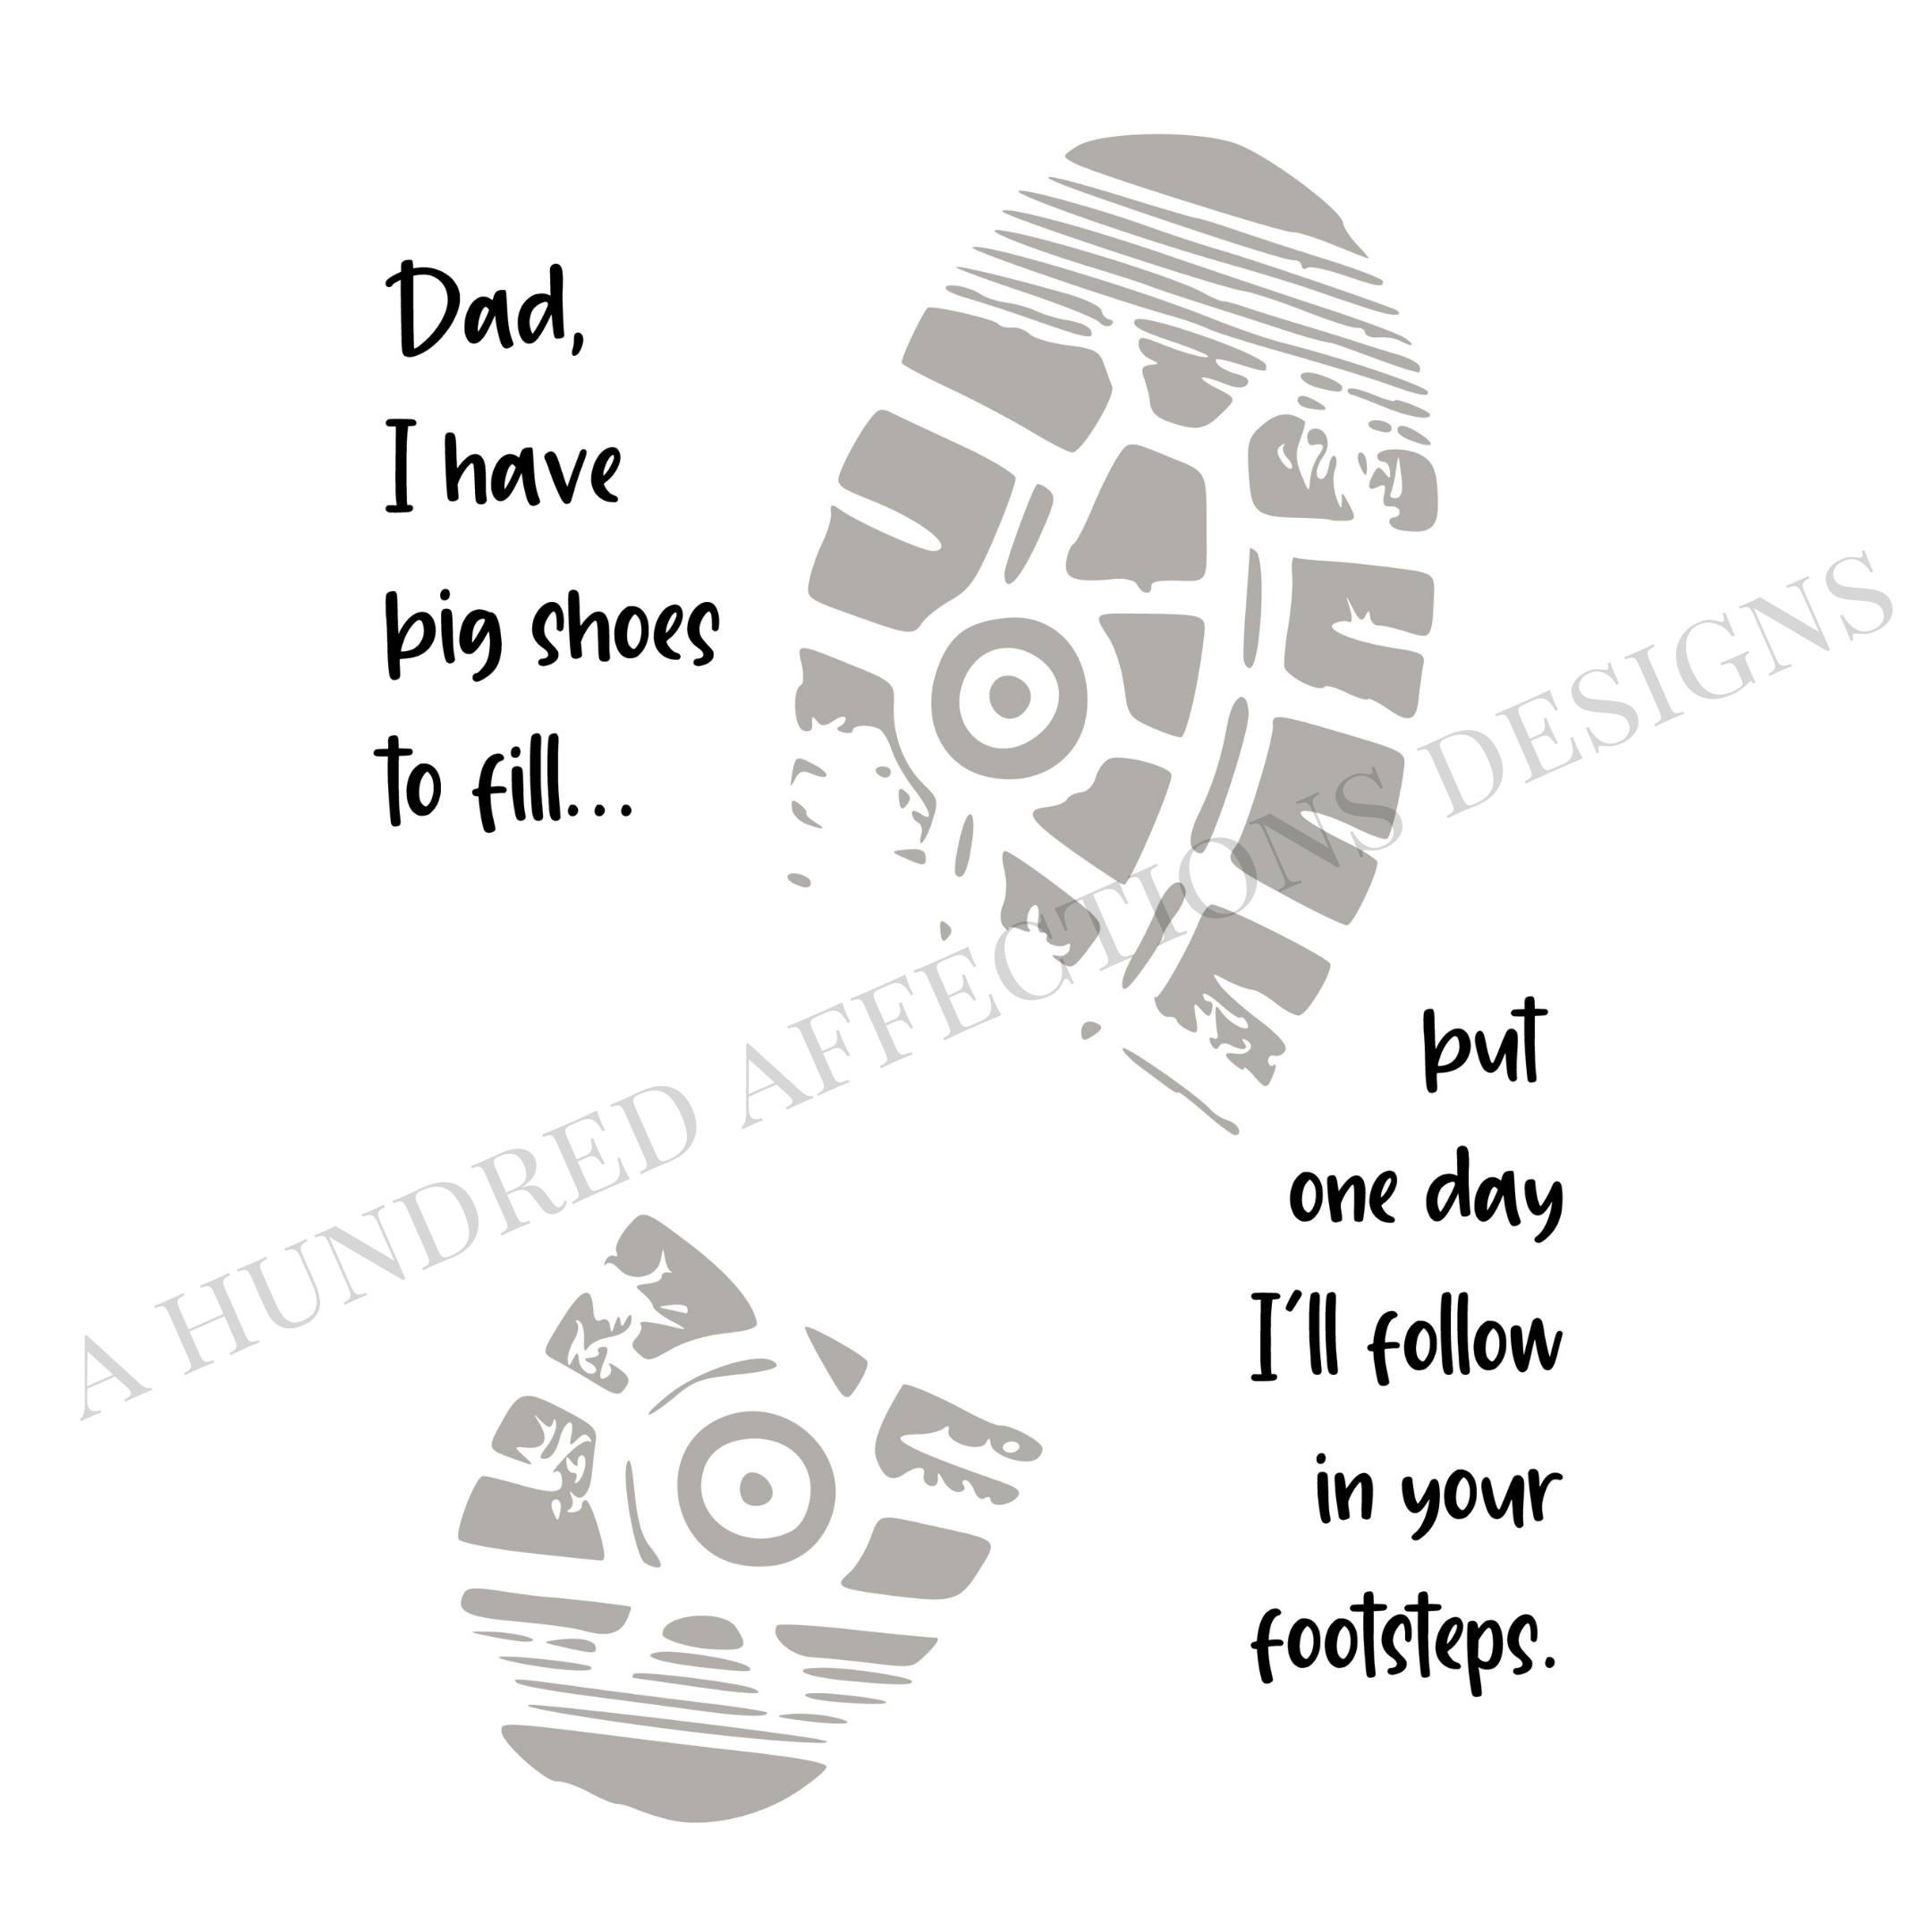 Big shoes to fill follow in your footsteps footprint dad gift printable